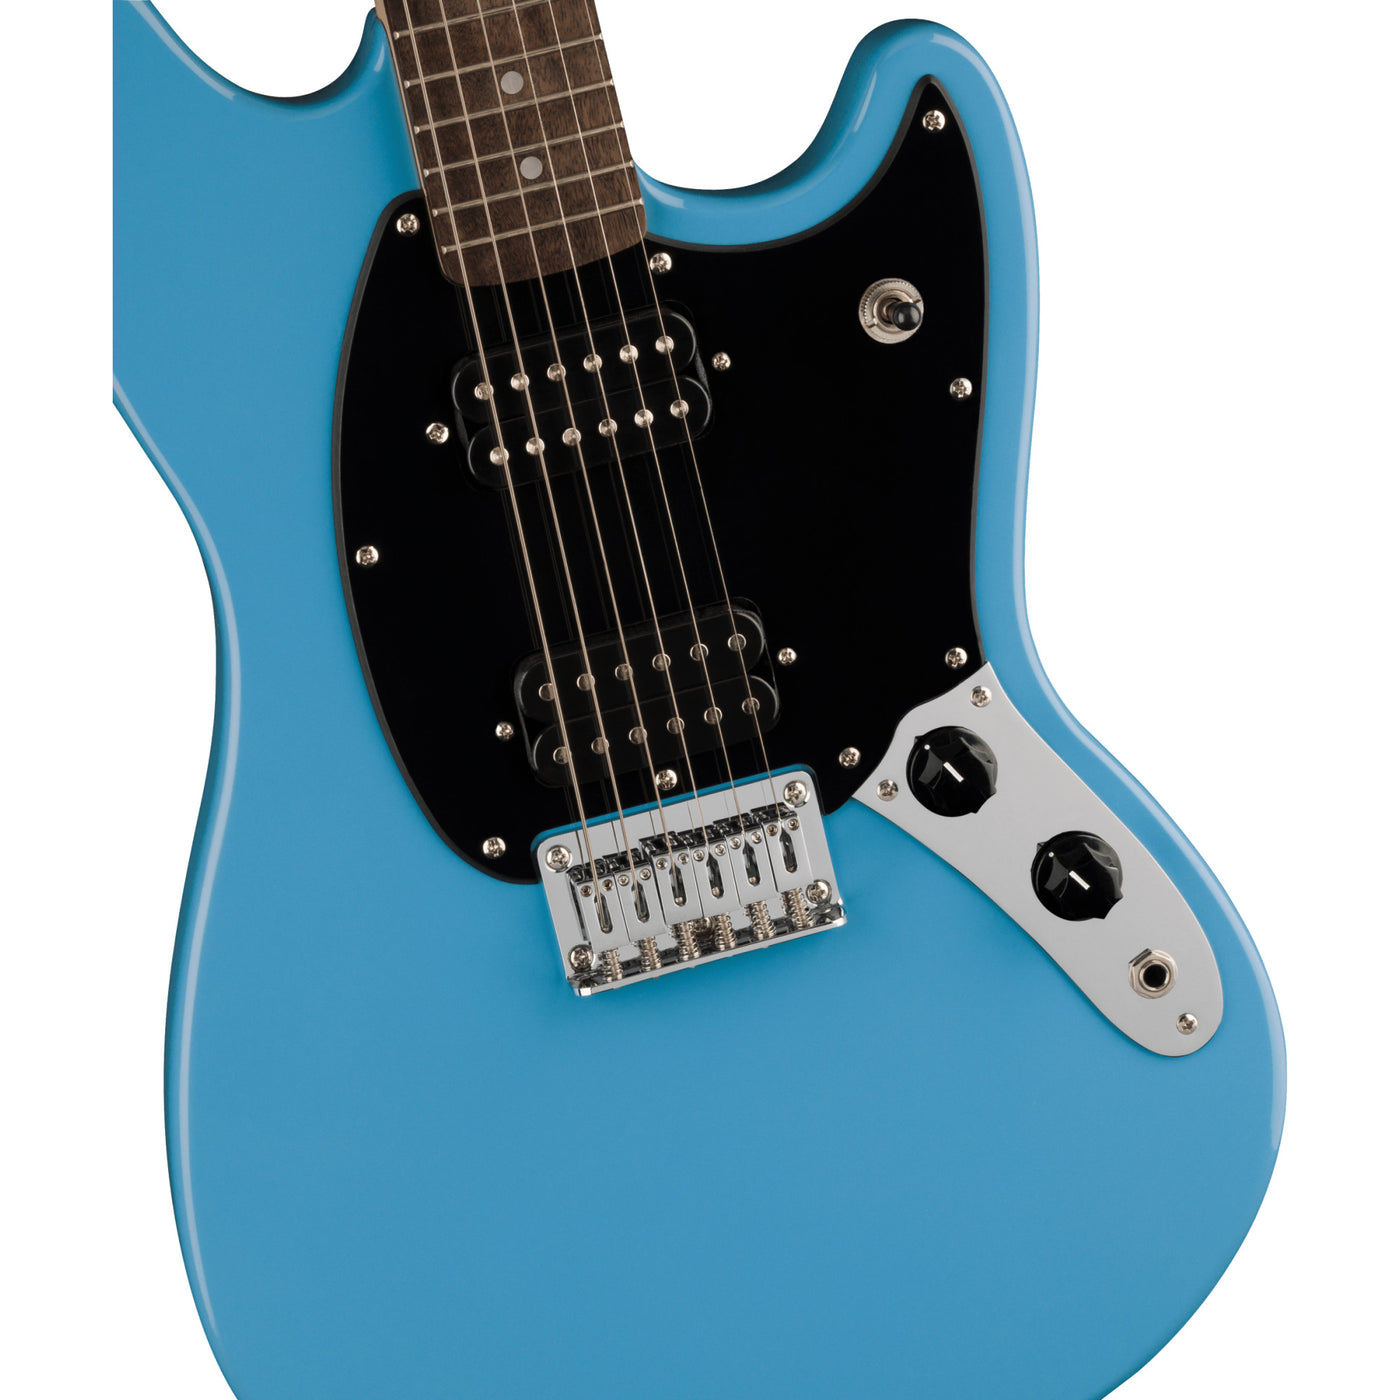 Squier Sonic Mustang HH Electric Guitar, California Blue (0373701526)